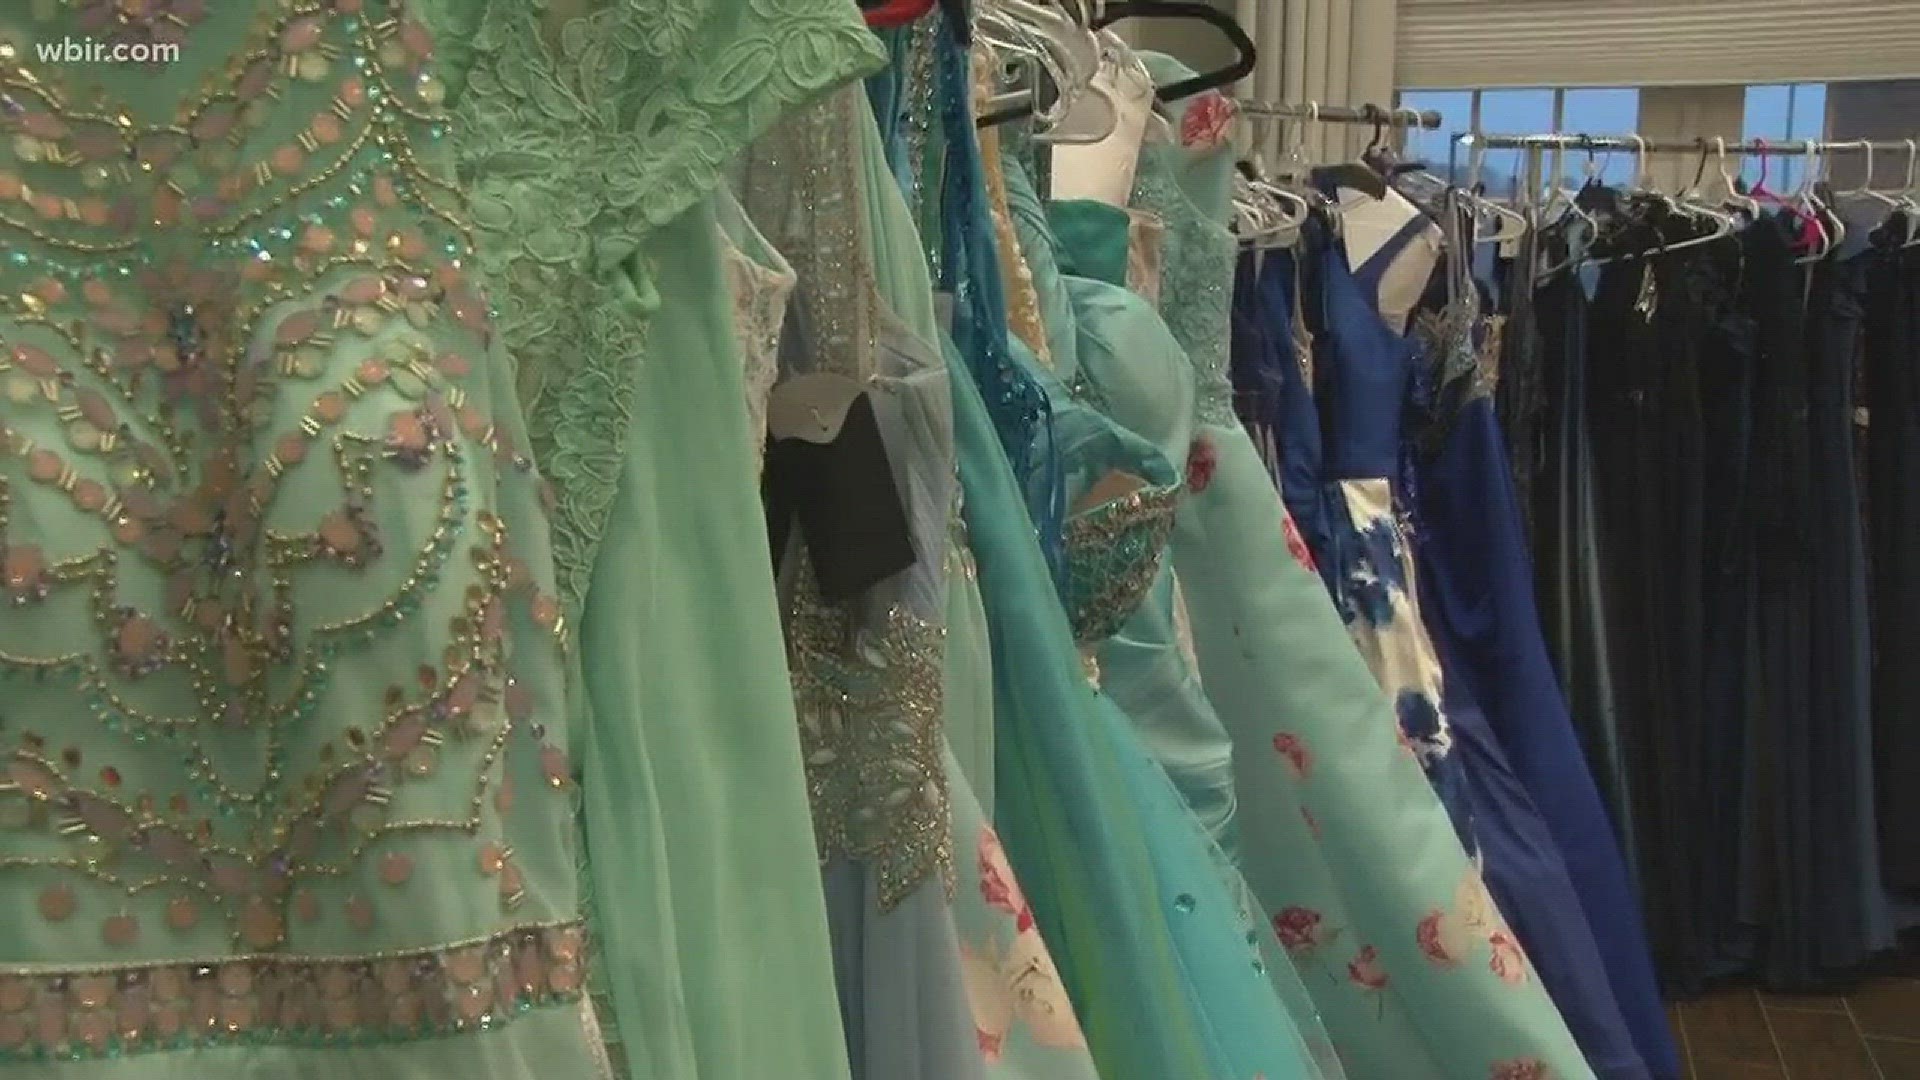 A sorority at UT is helping girls 'say yes to the prom dress' this weekend.